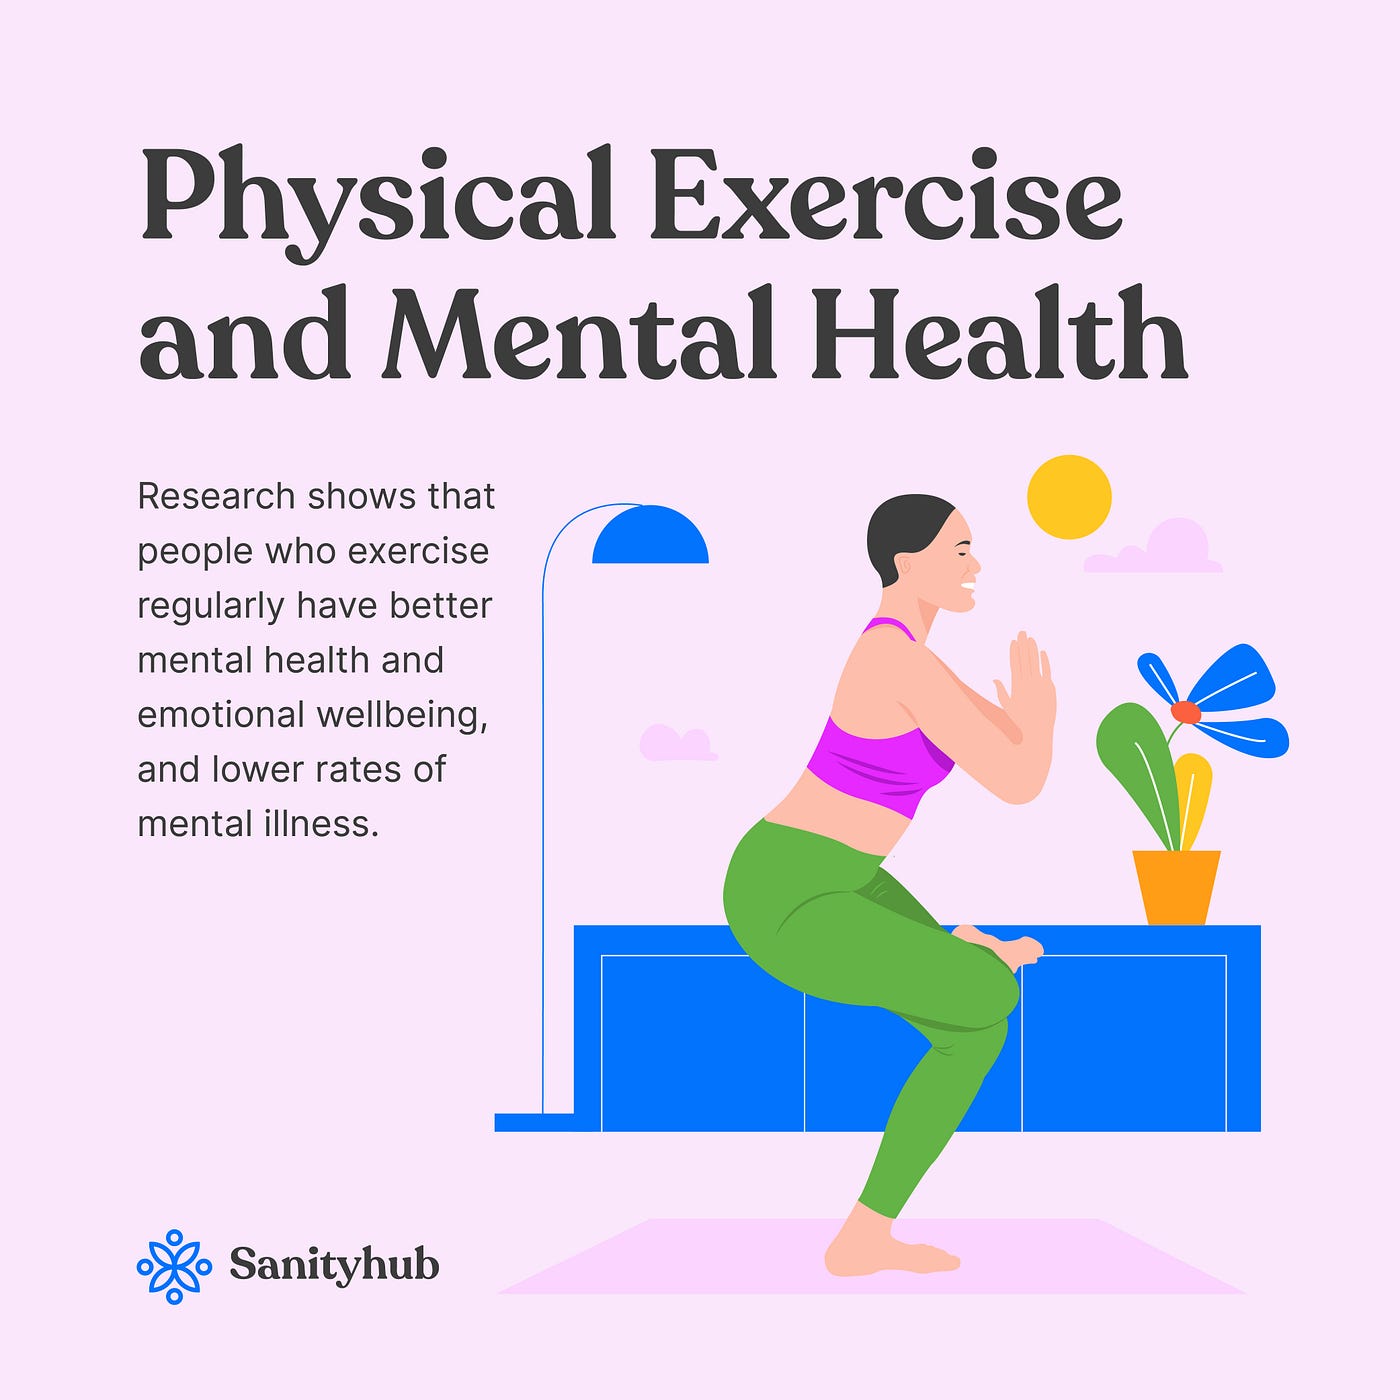 Physical Exercise and Mental Health, by SanityHub